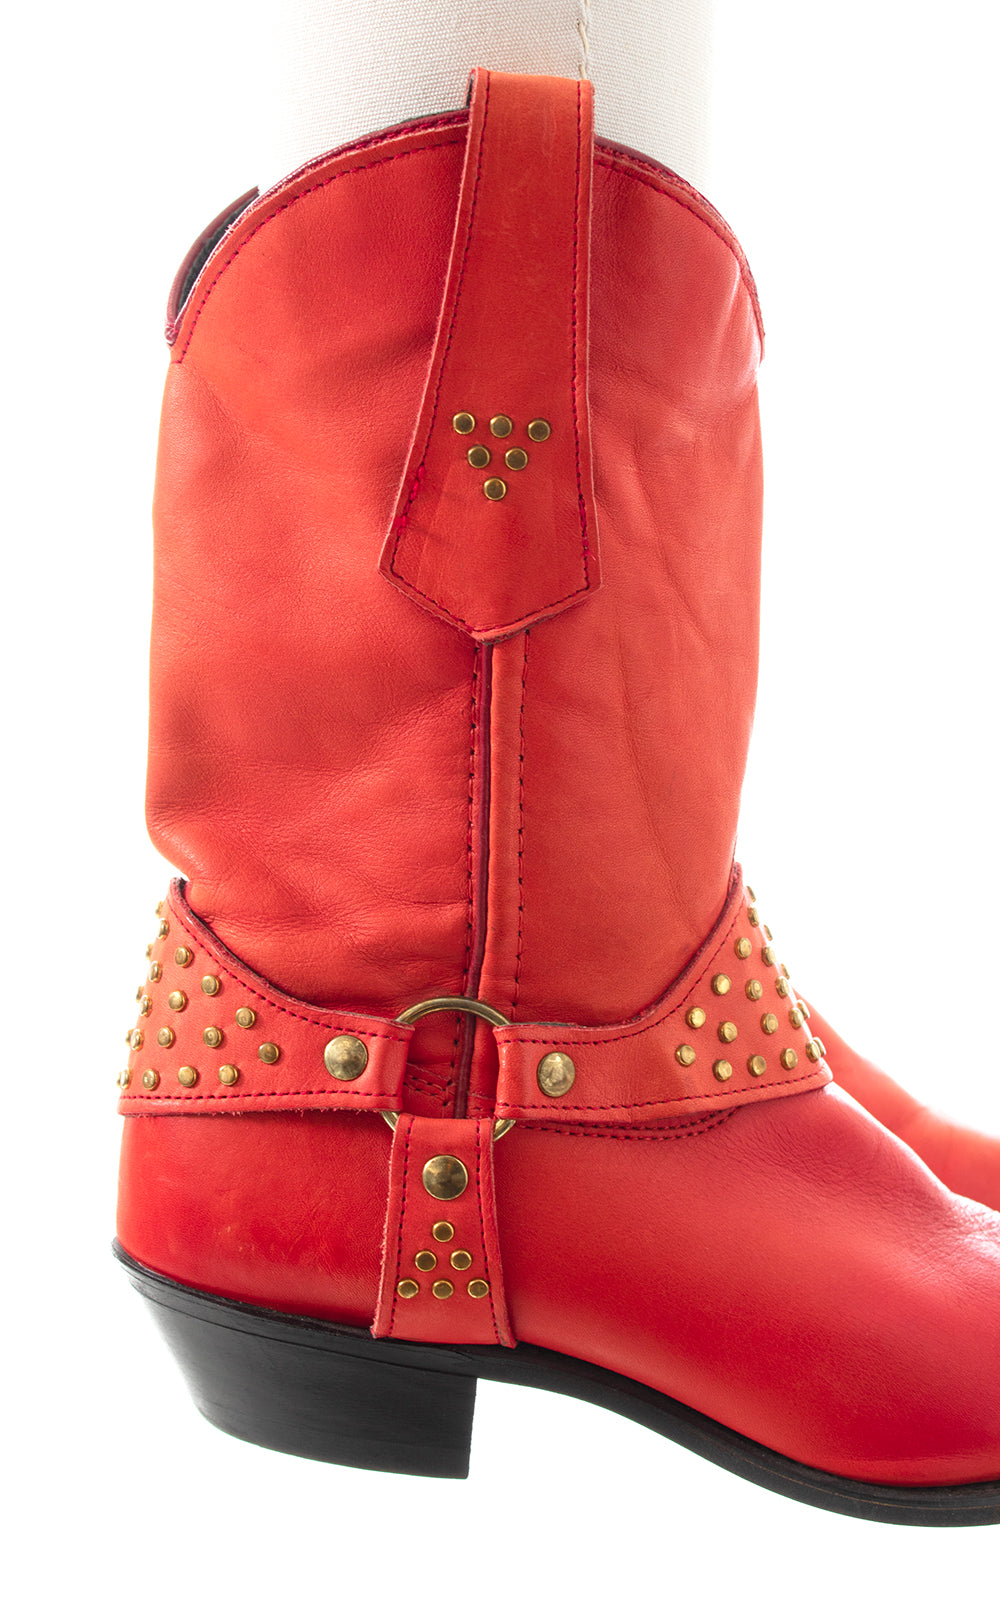 1980s 1990s WRANGLER Studded Red Leather Boots | US 7.5